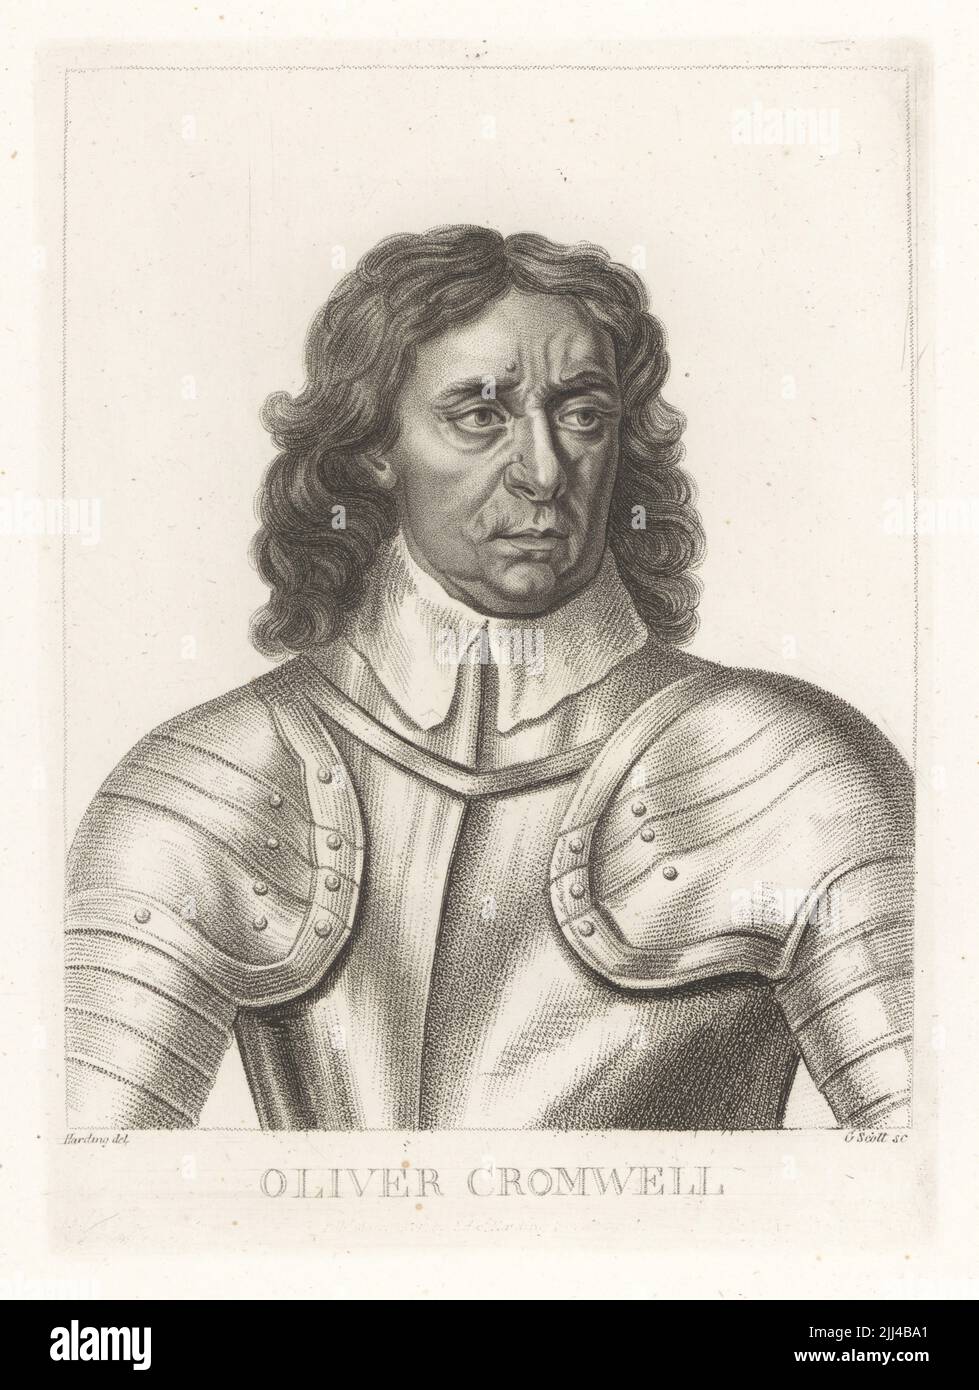 Portrait of Oliver Cromwell, 1599-1658, parliamentary leader in the English Civil War, Lord Protector. In suit of plate armour. Copperplate stipple engraving by G. Scott after a drawing by Edward Harding after a painting by Sir Peter Lely from Samuel Woodburn’s Gallery of Rare Portraits Consisting of Original Plates, George Jones, 102 St Martin’s Lane, London, 1816. Stock Photo